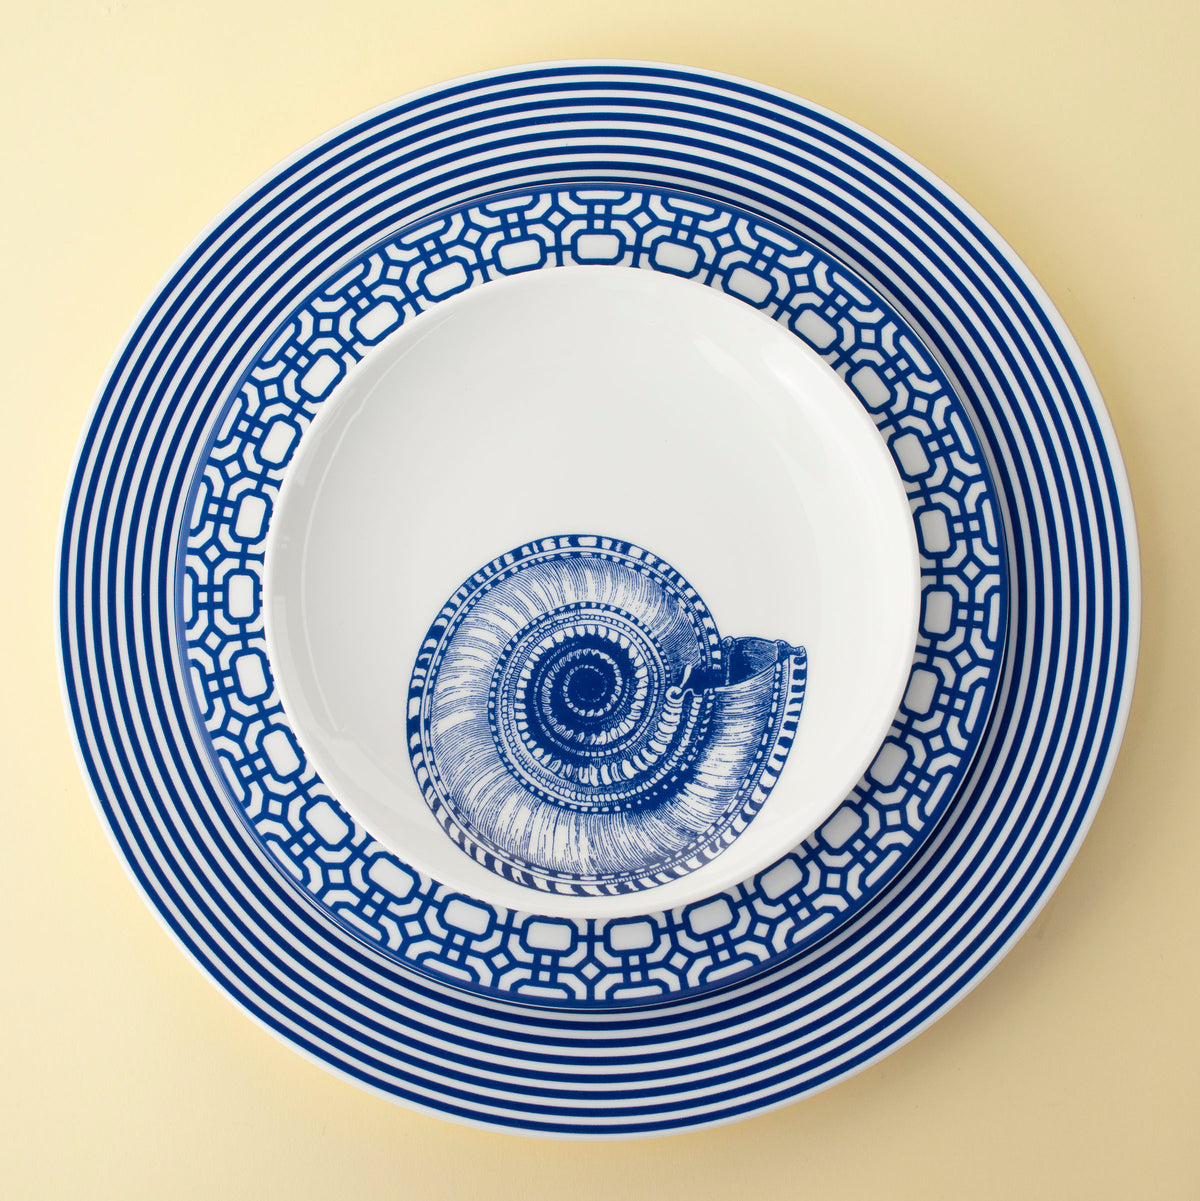 Three blue-and-white plates with geometric and striped patterns are stacked. The smallest plate, part of our beach collection, features a blue nautilus shell design in the center. This Shells Small Plates by Caskata Artisanal Home is set against a light yellow background.